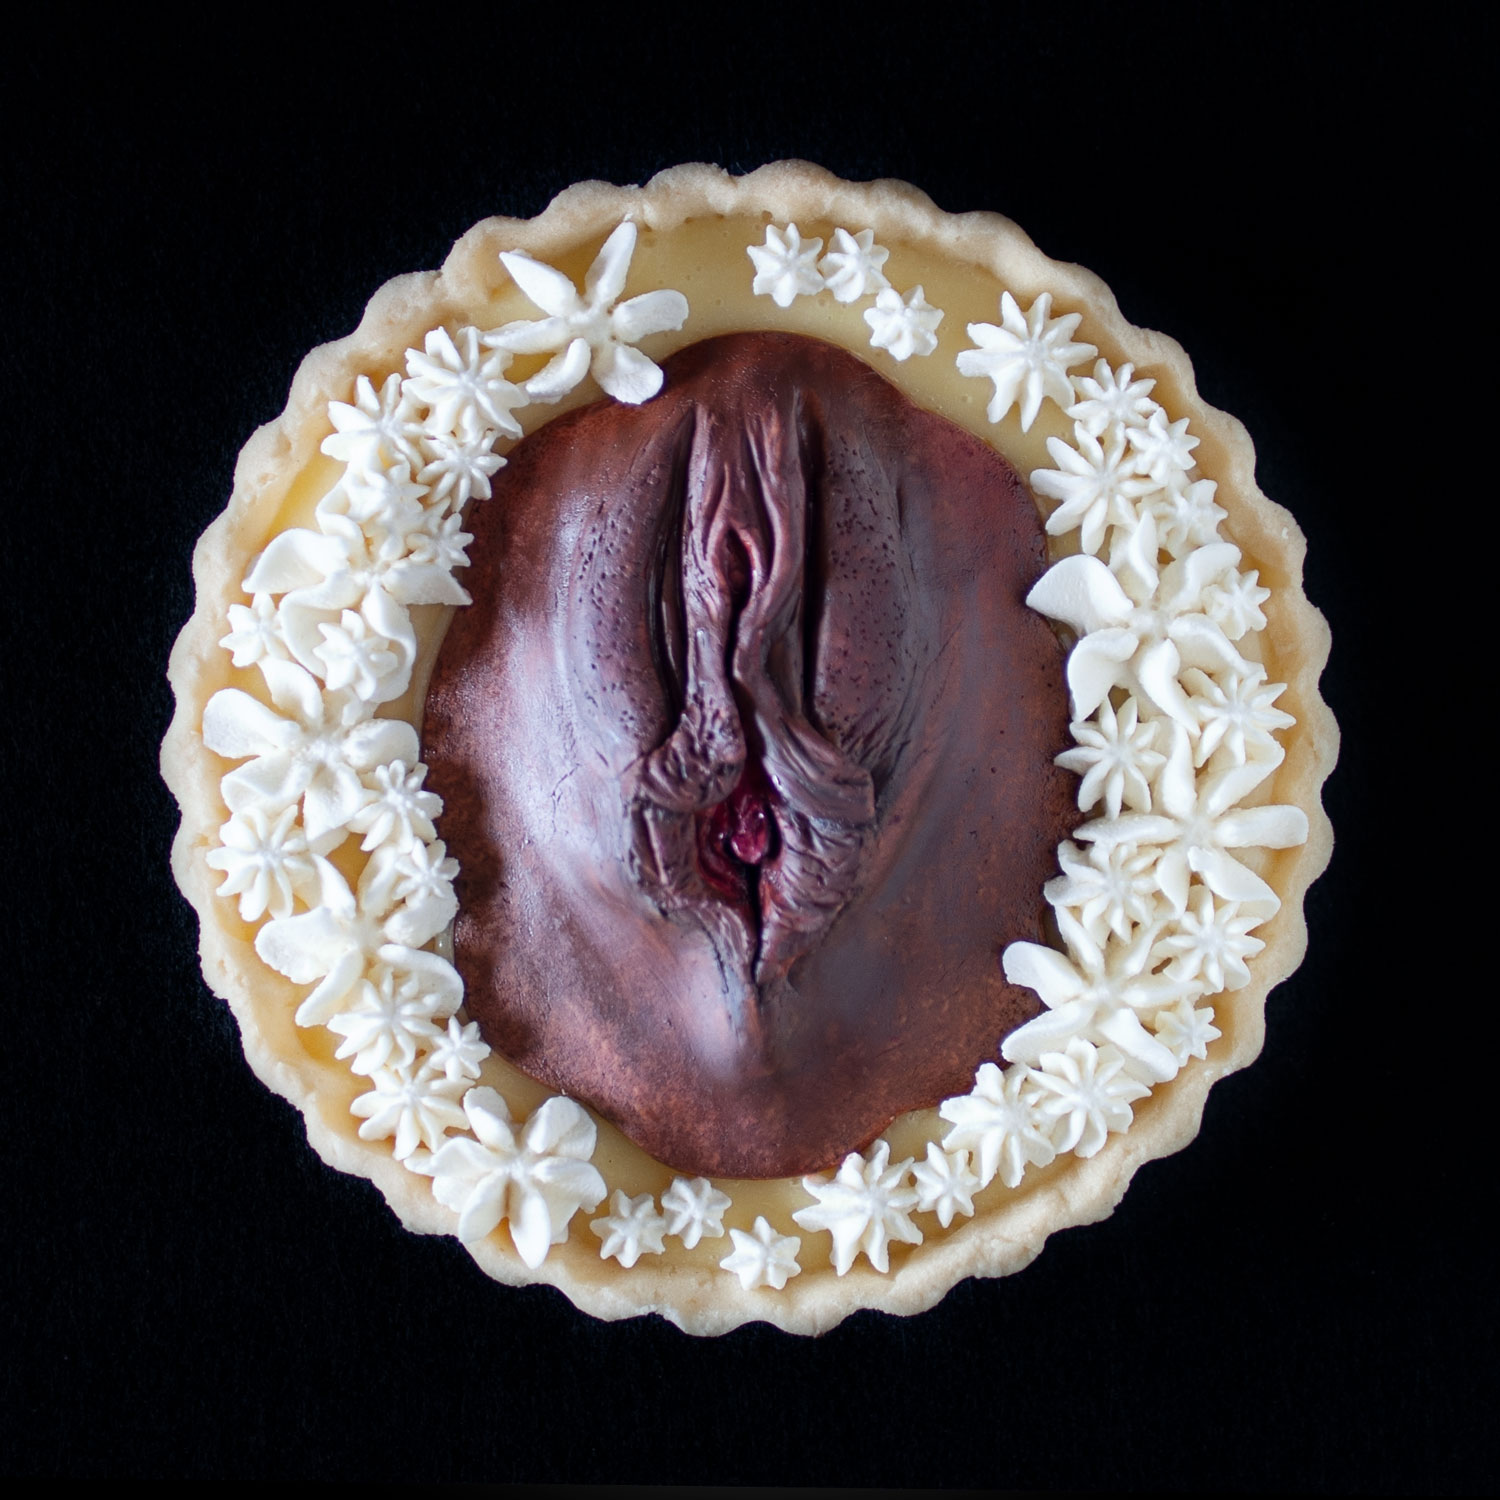 A top view of a lemon cream tart decorated with piped whipped cream and a hand sculpted vulva painted to look like a realistic human vulva with dark pigmented skin